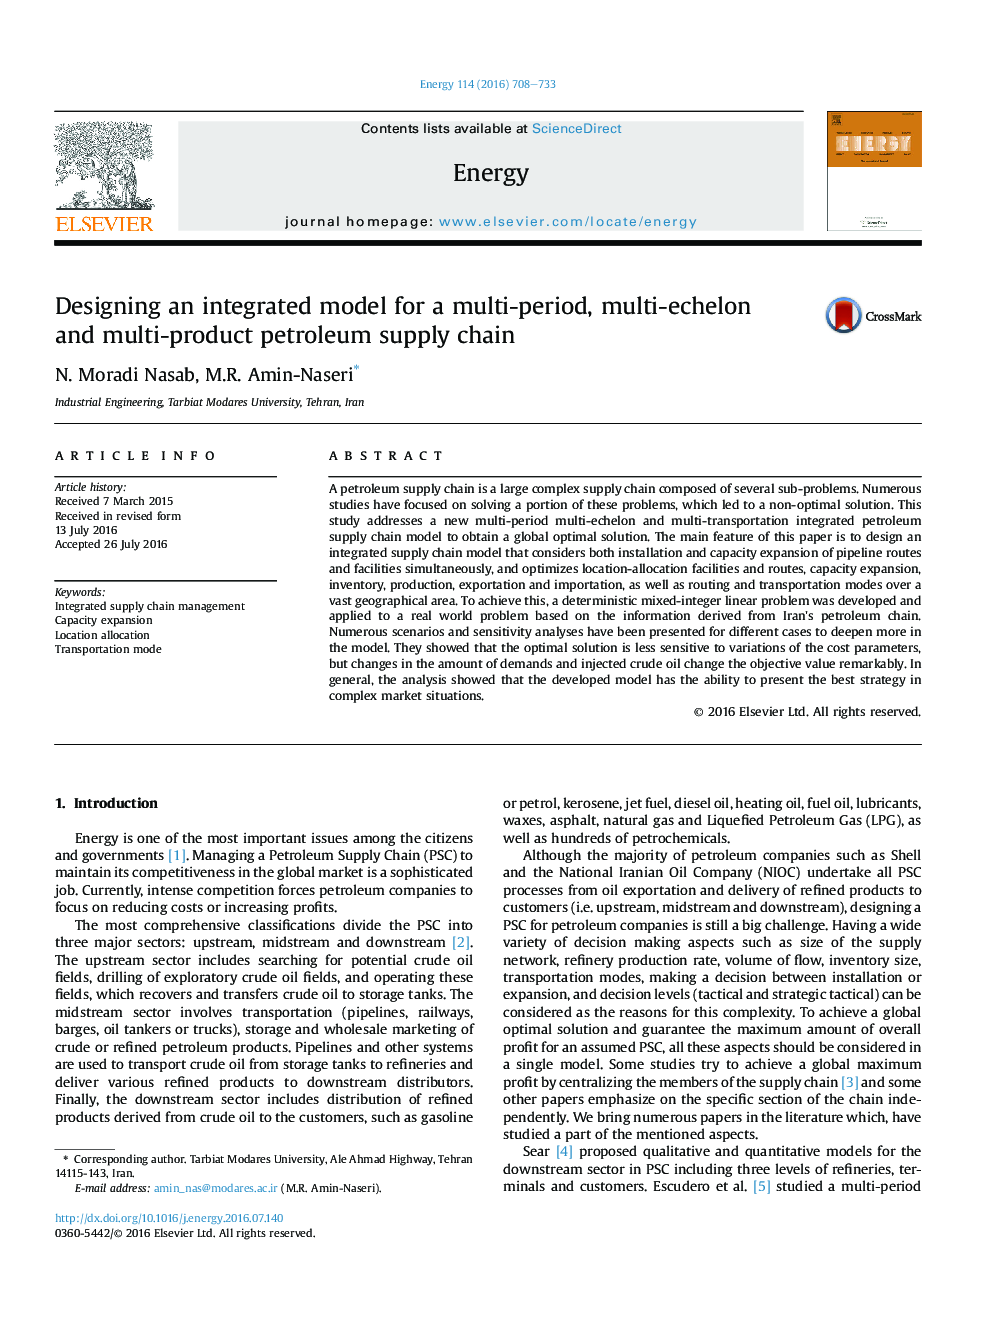 Designing an integrated model for a multi-period, multi-echelon and multi-product petroleum supply chain